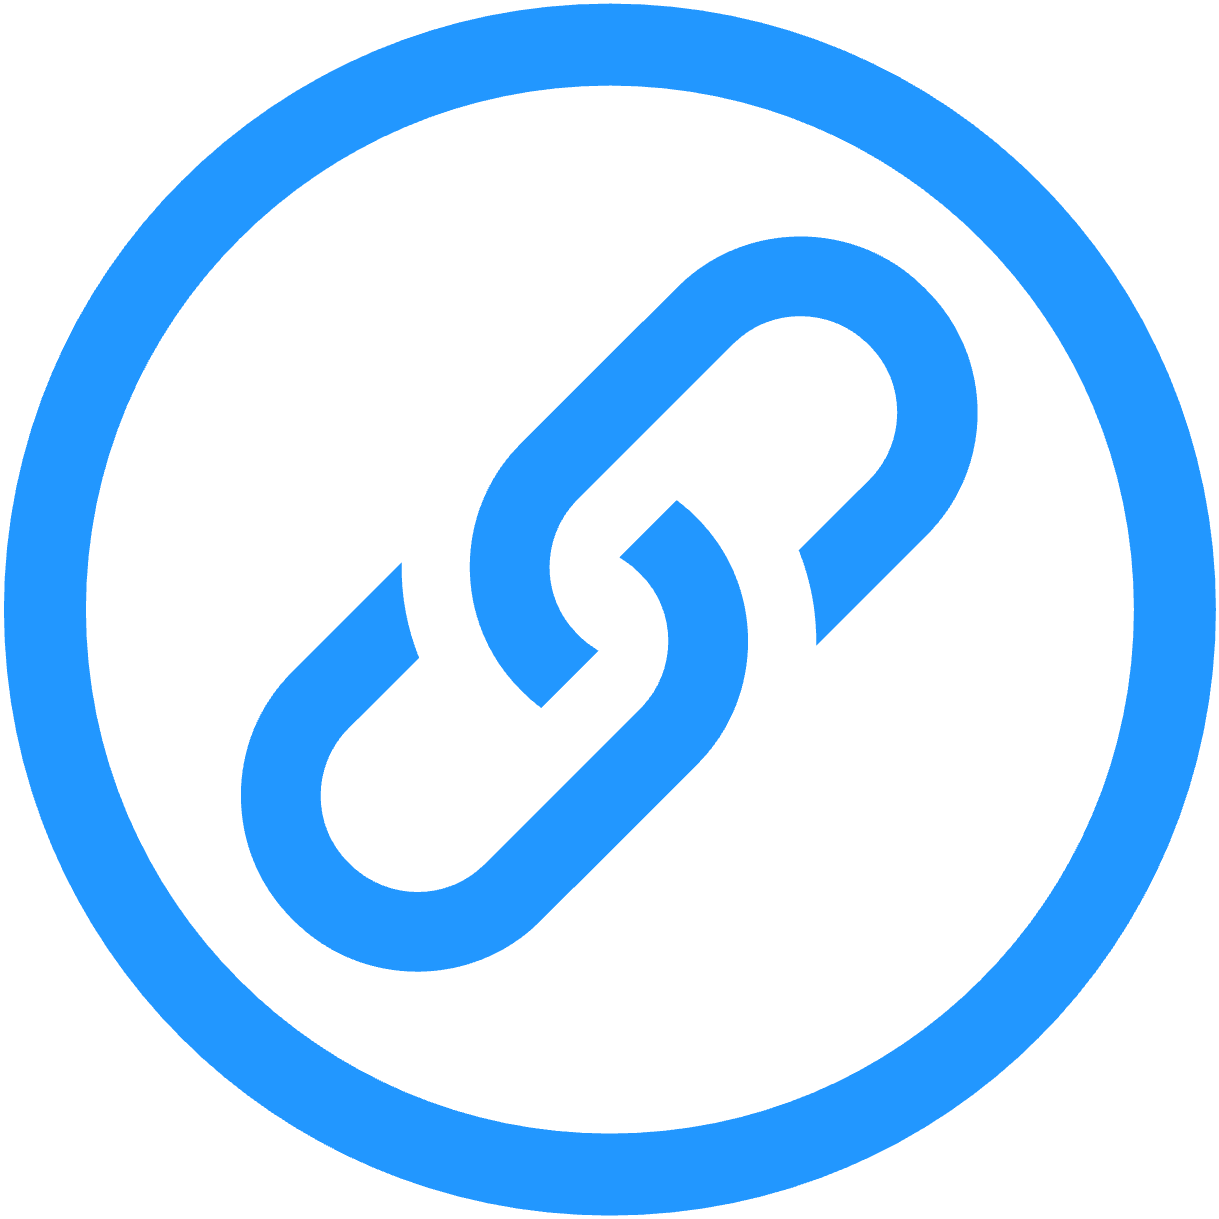 Icon of two chain links inside a circle